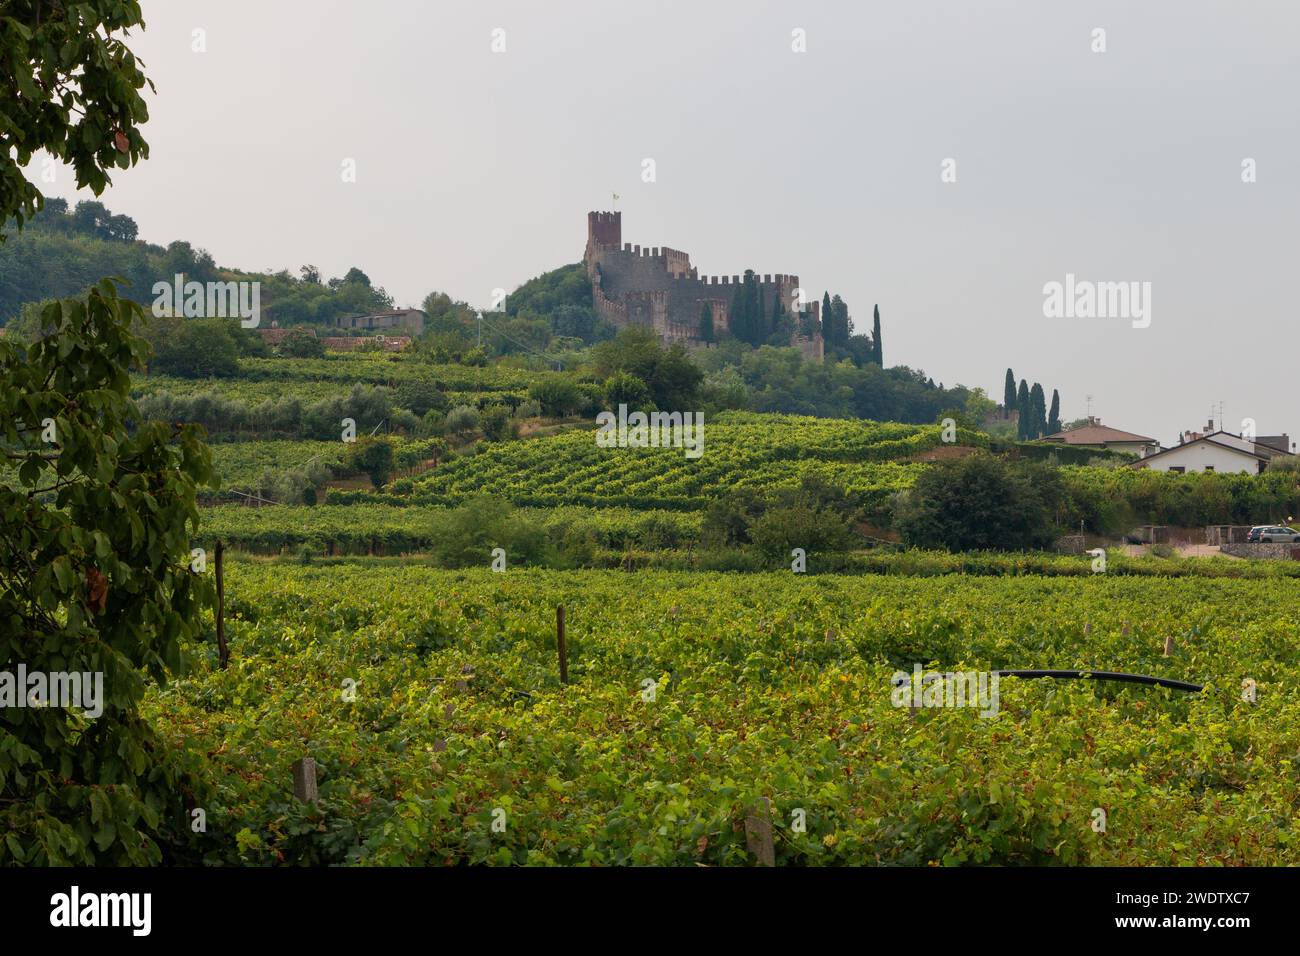 the castle of Soave against the backdrop of magnificent vineyards Stock Photo